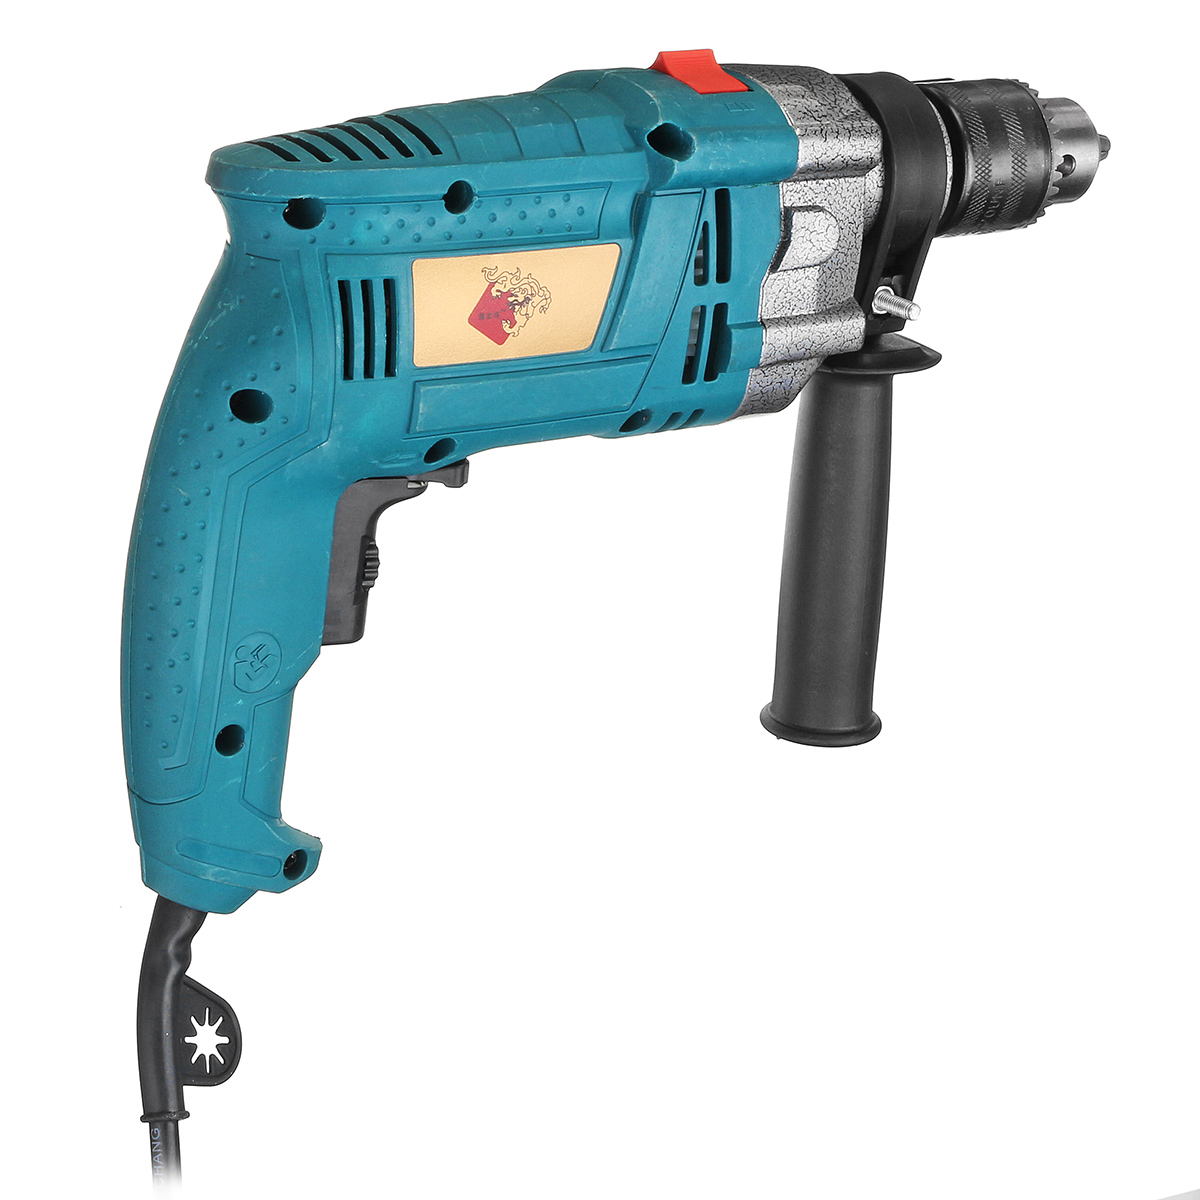 1980W-3800rpm-Electric-Impact-Drill-360deg-Rotary-Skid-Proof-Handle-With-Depth-Measuring-Scale-Spina-1715301-10